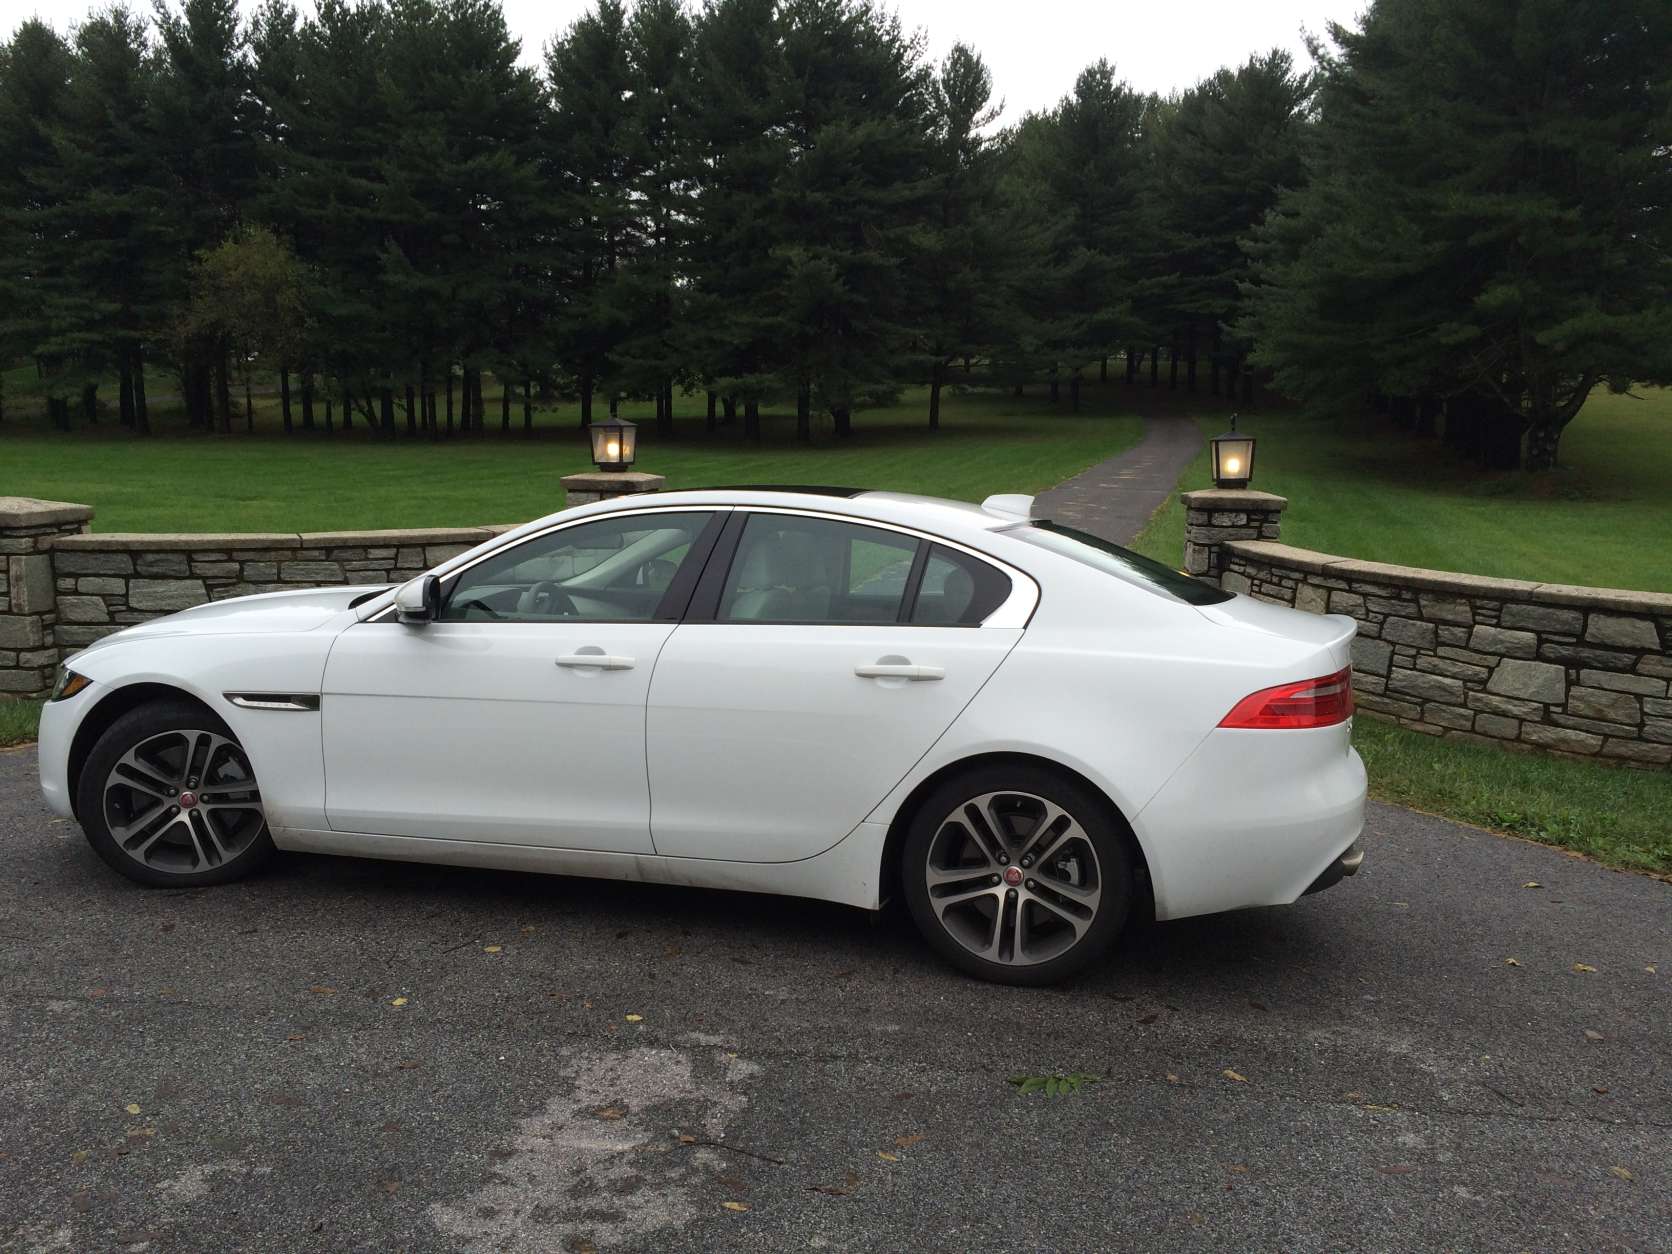 The 2017 Jaguar XE 35t has a starting price of around $41,700. (WTOP/Mike Parris)